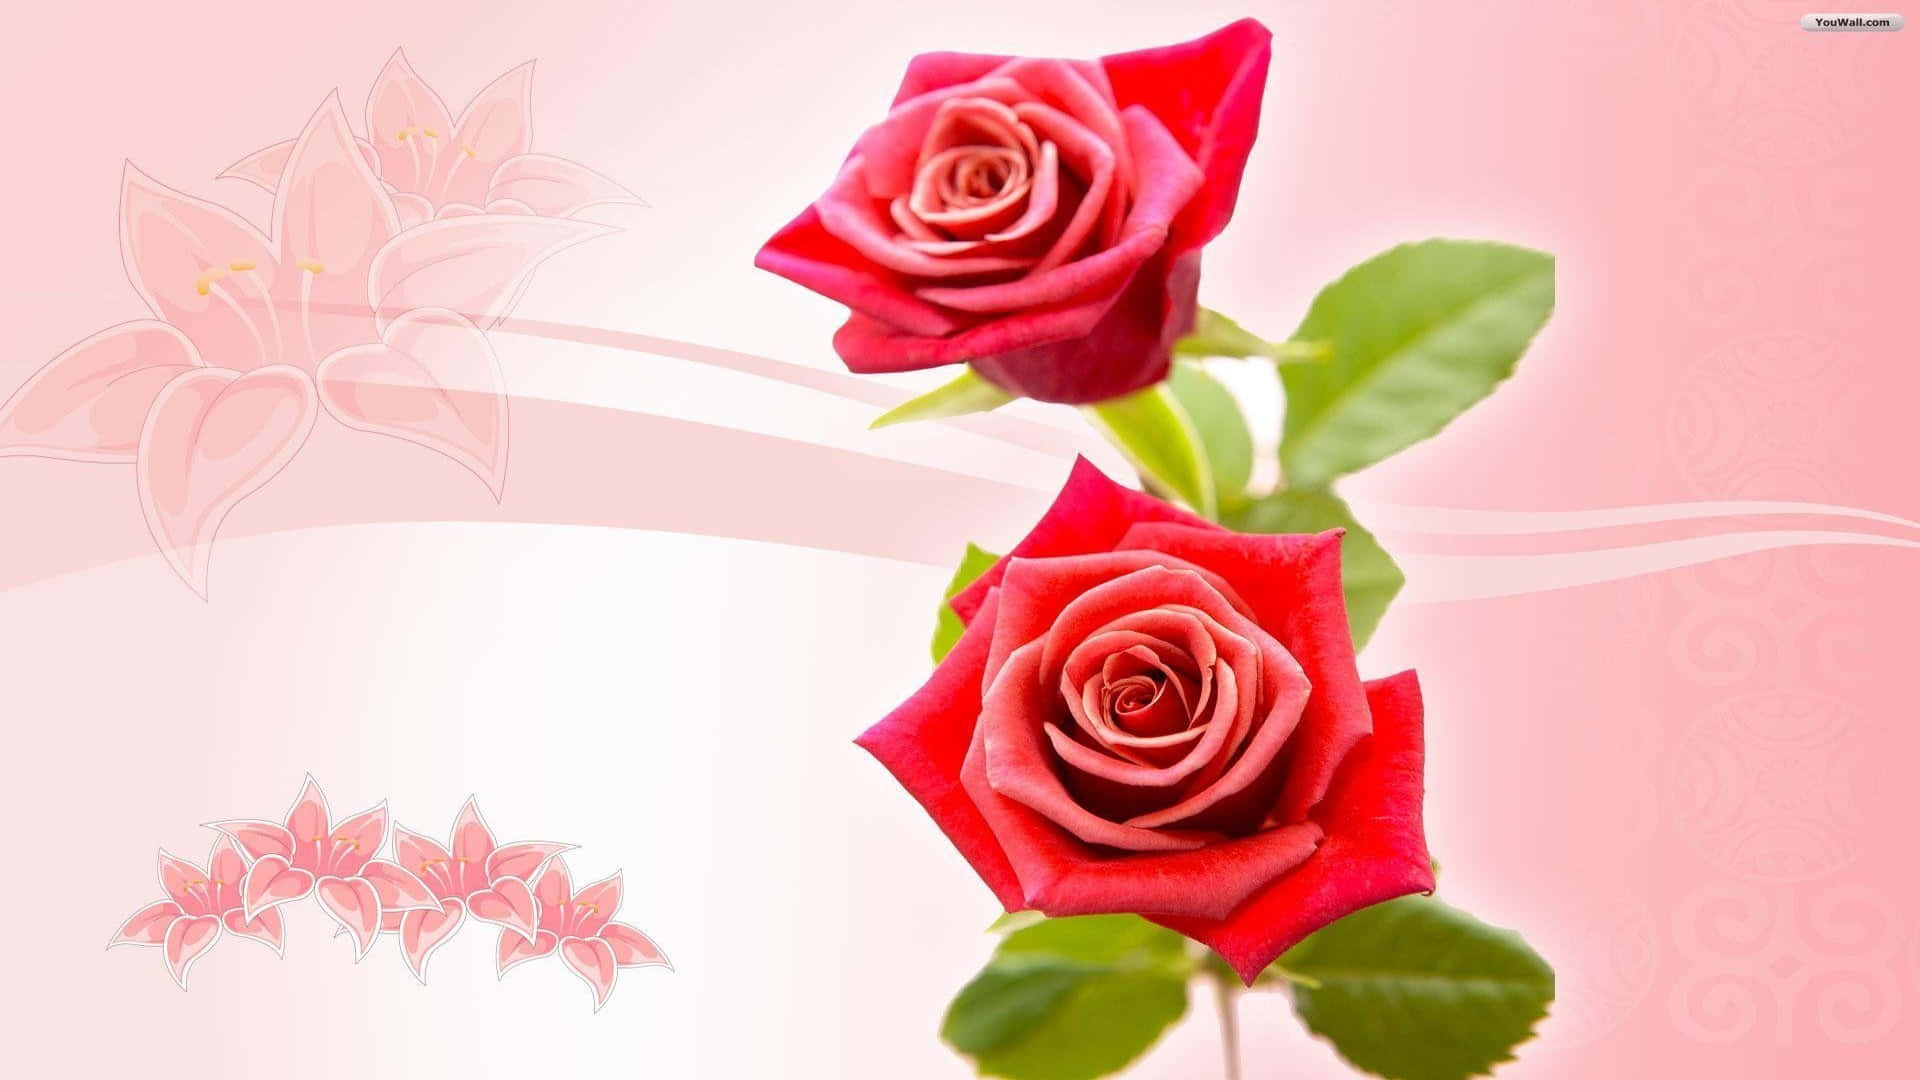 1080p Red Roses Graphic Background